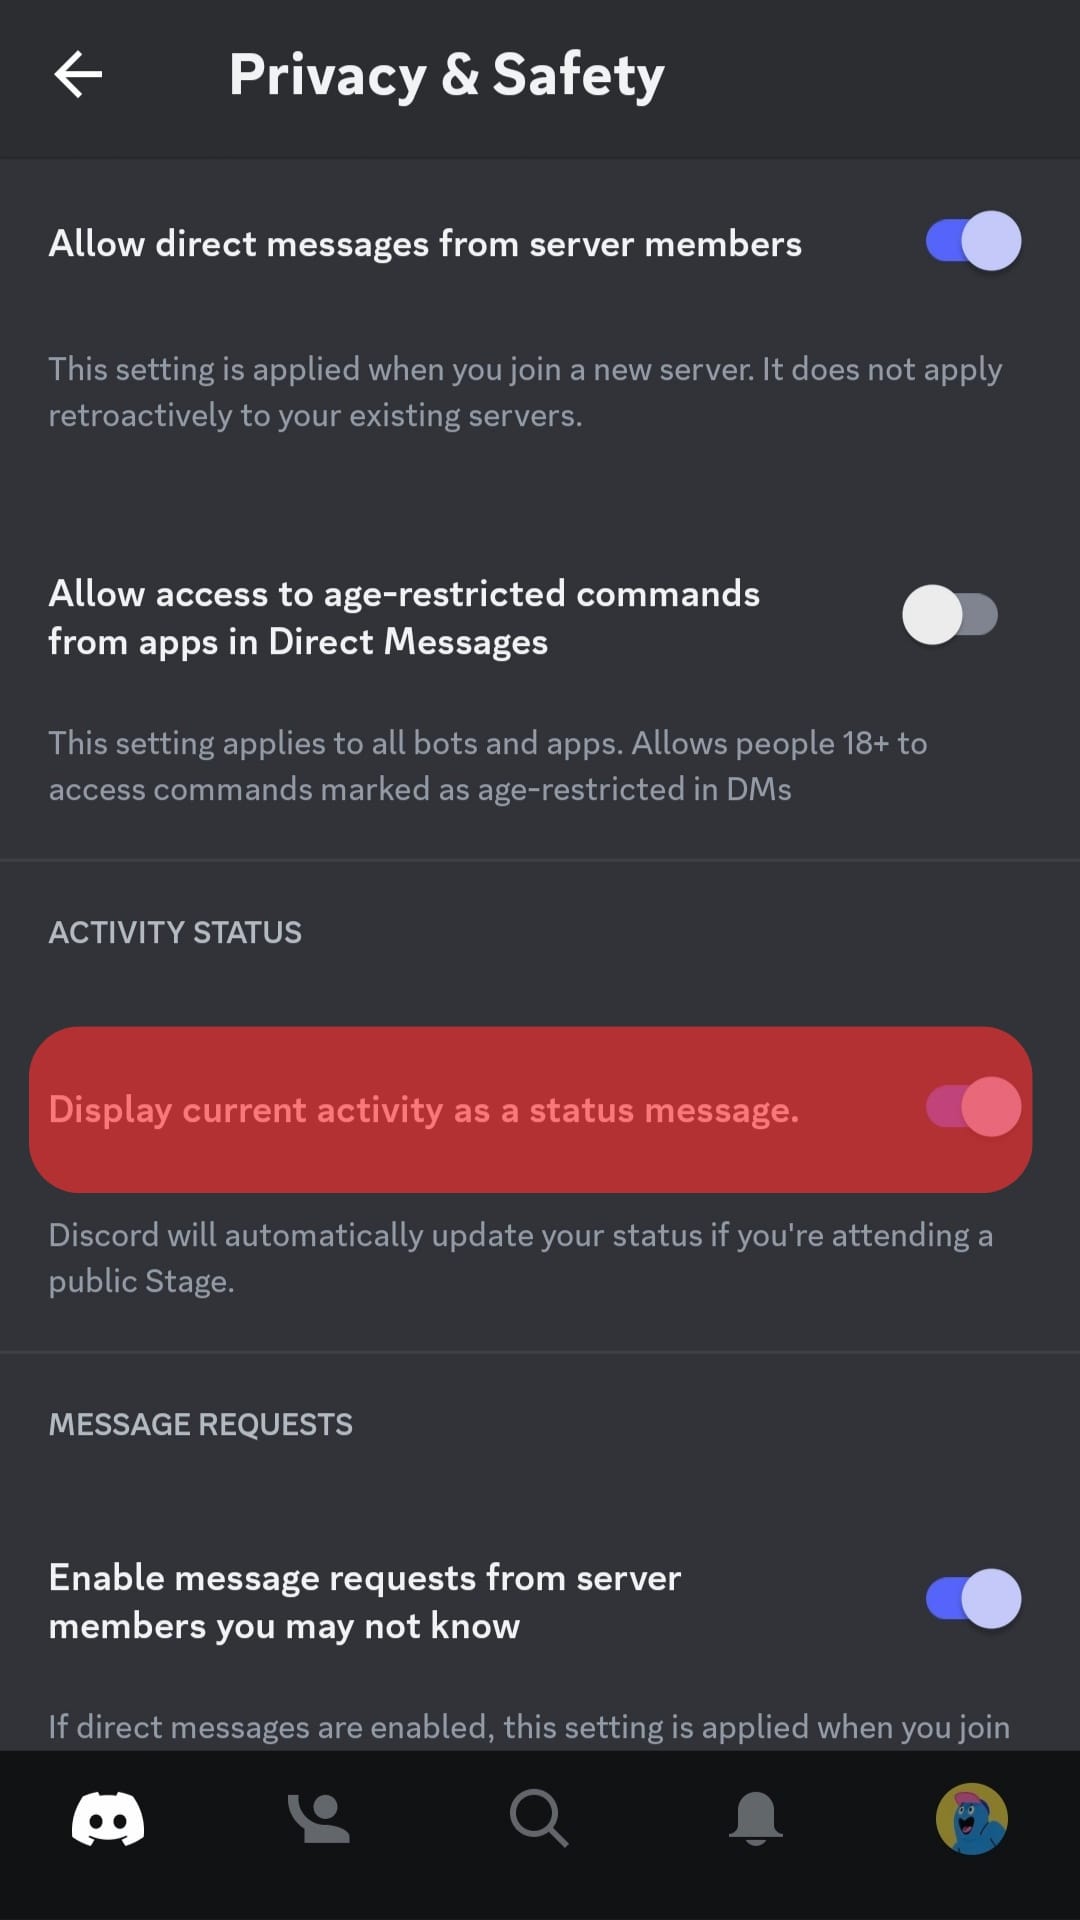 Disable Display Current Activity As A Status Message